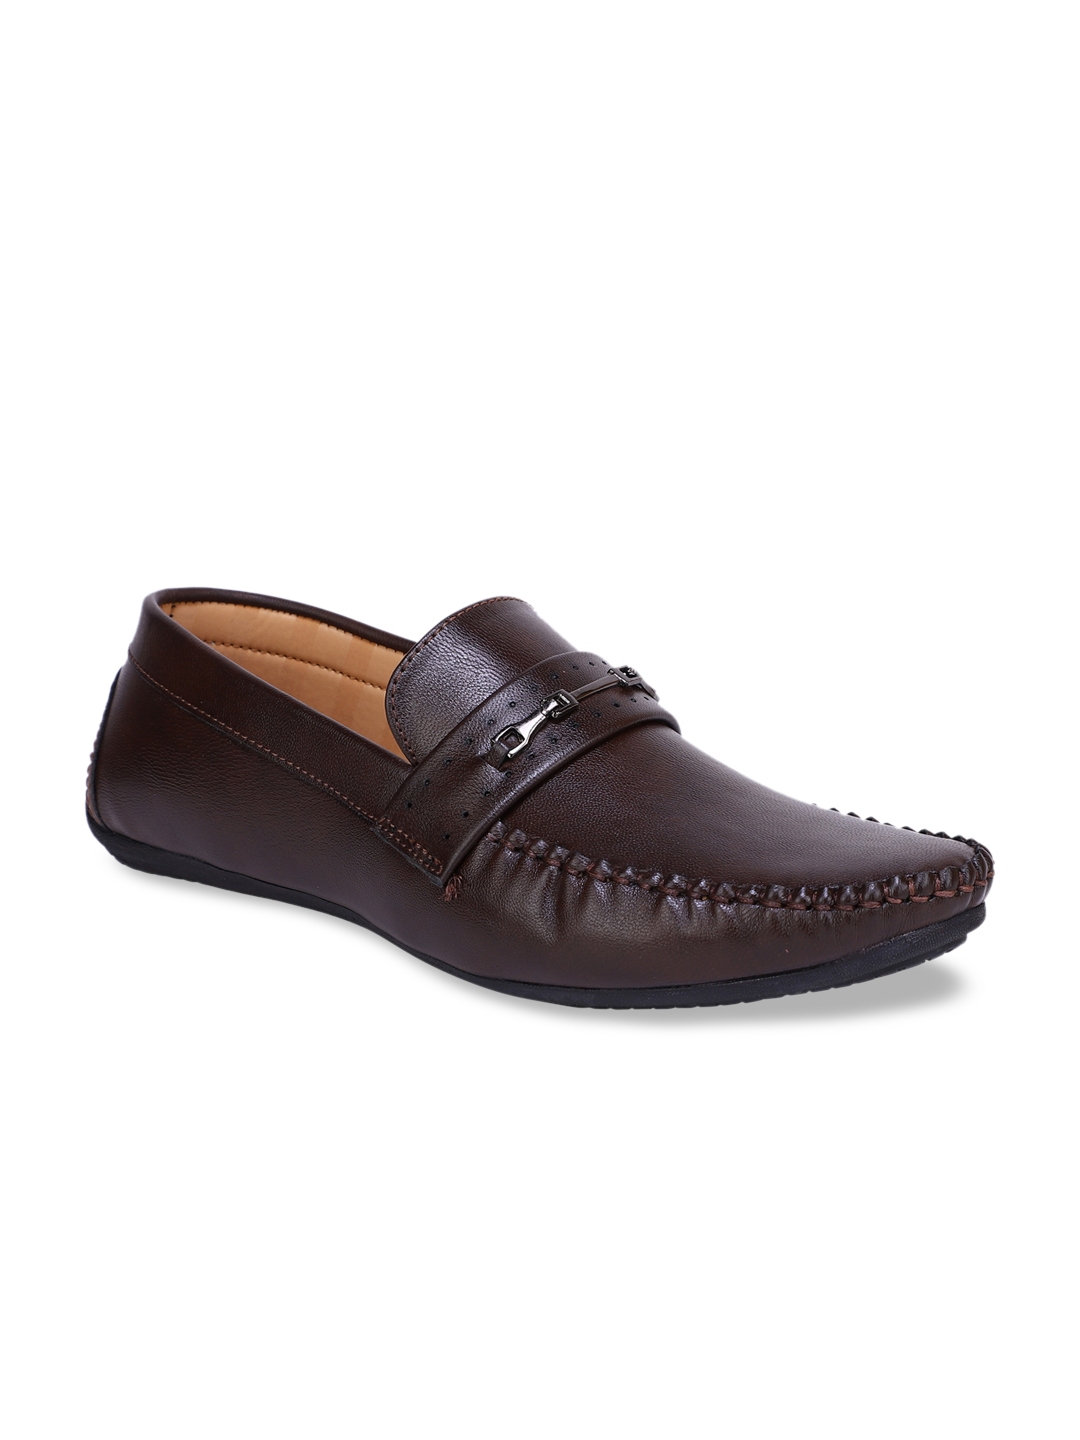 Buy Respiro Men Brown Loafers - Casual Shoes for Men 10216465 | Myntra